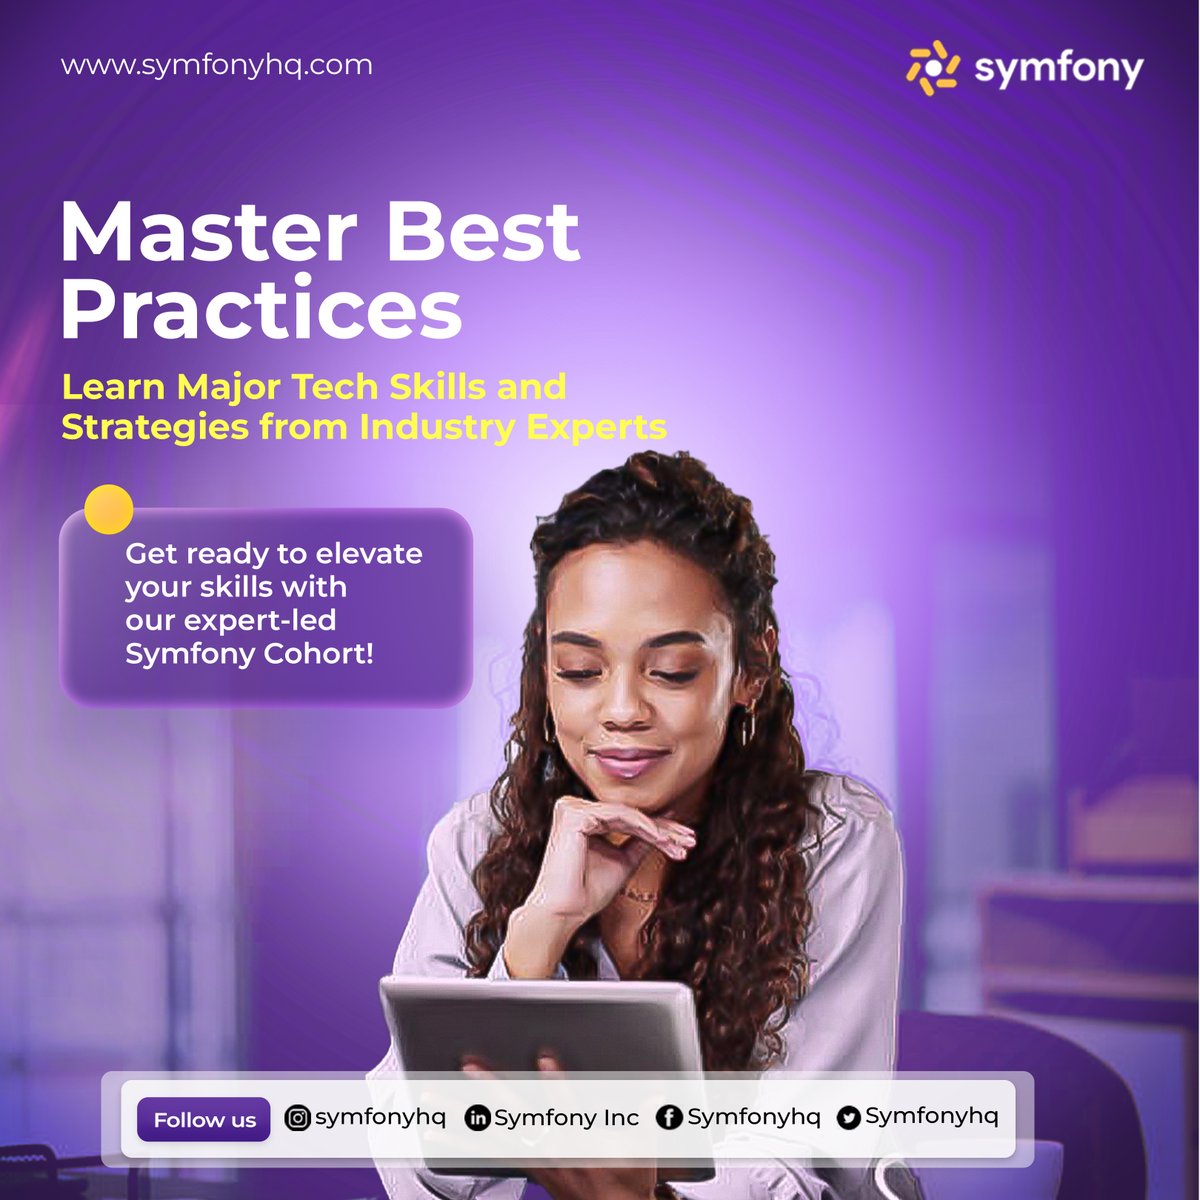 Learn Major Tech Skills & Strategies from Industry Experts! Choose from 3 essential tech courses: Product Management, Scrum Master, and QA Engineering. #SymfonyCohort #TechSkills